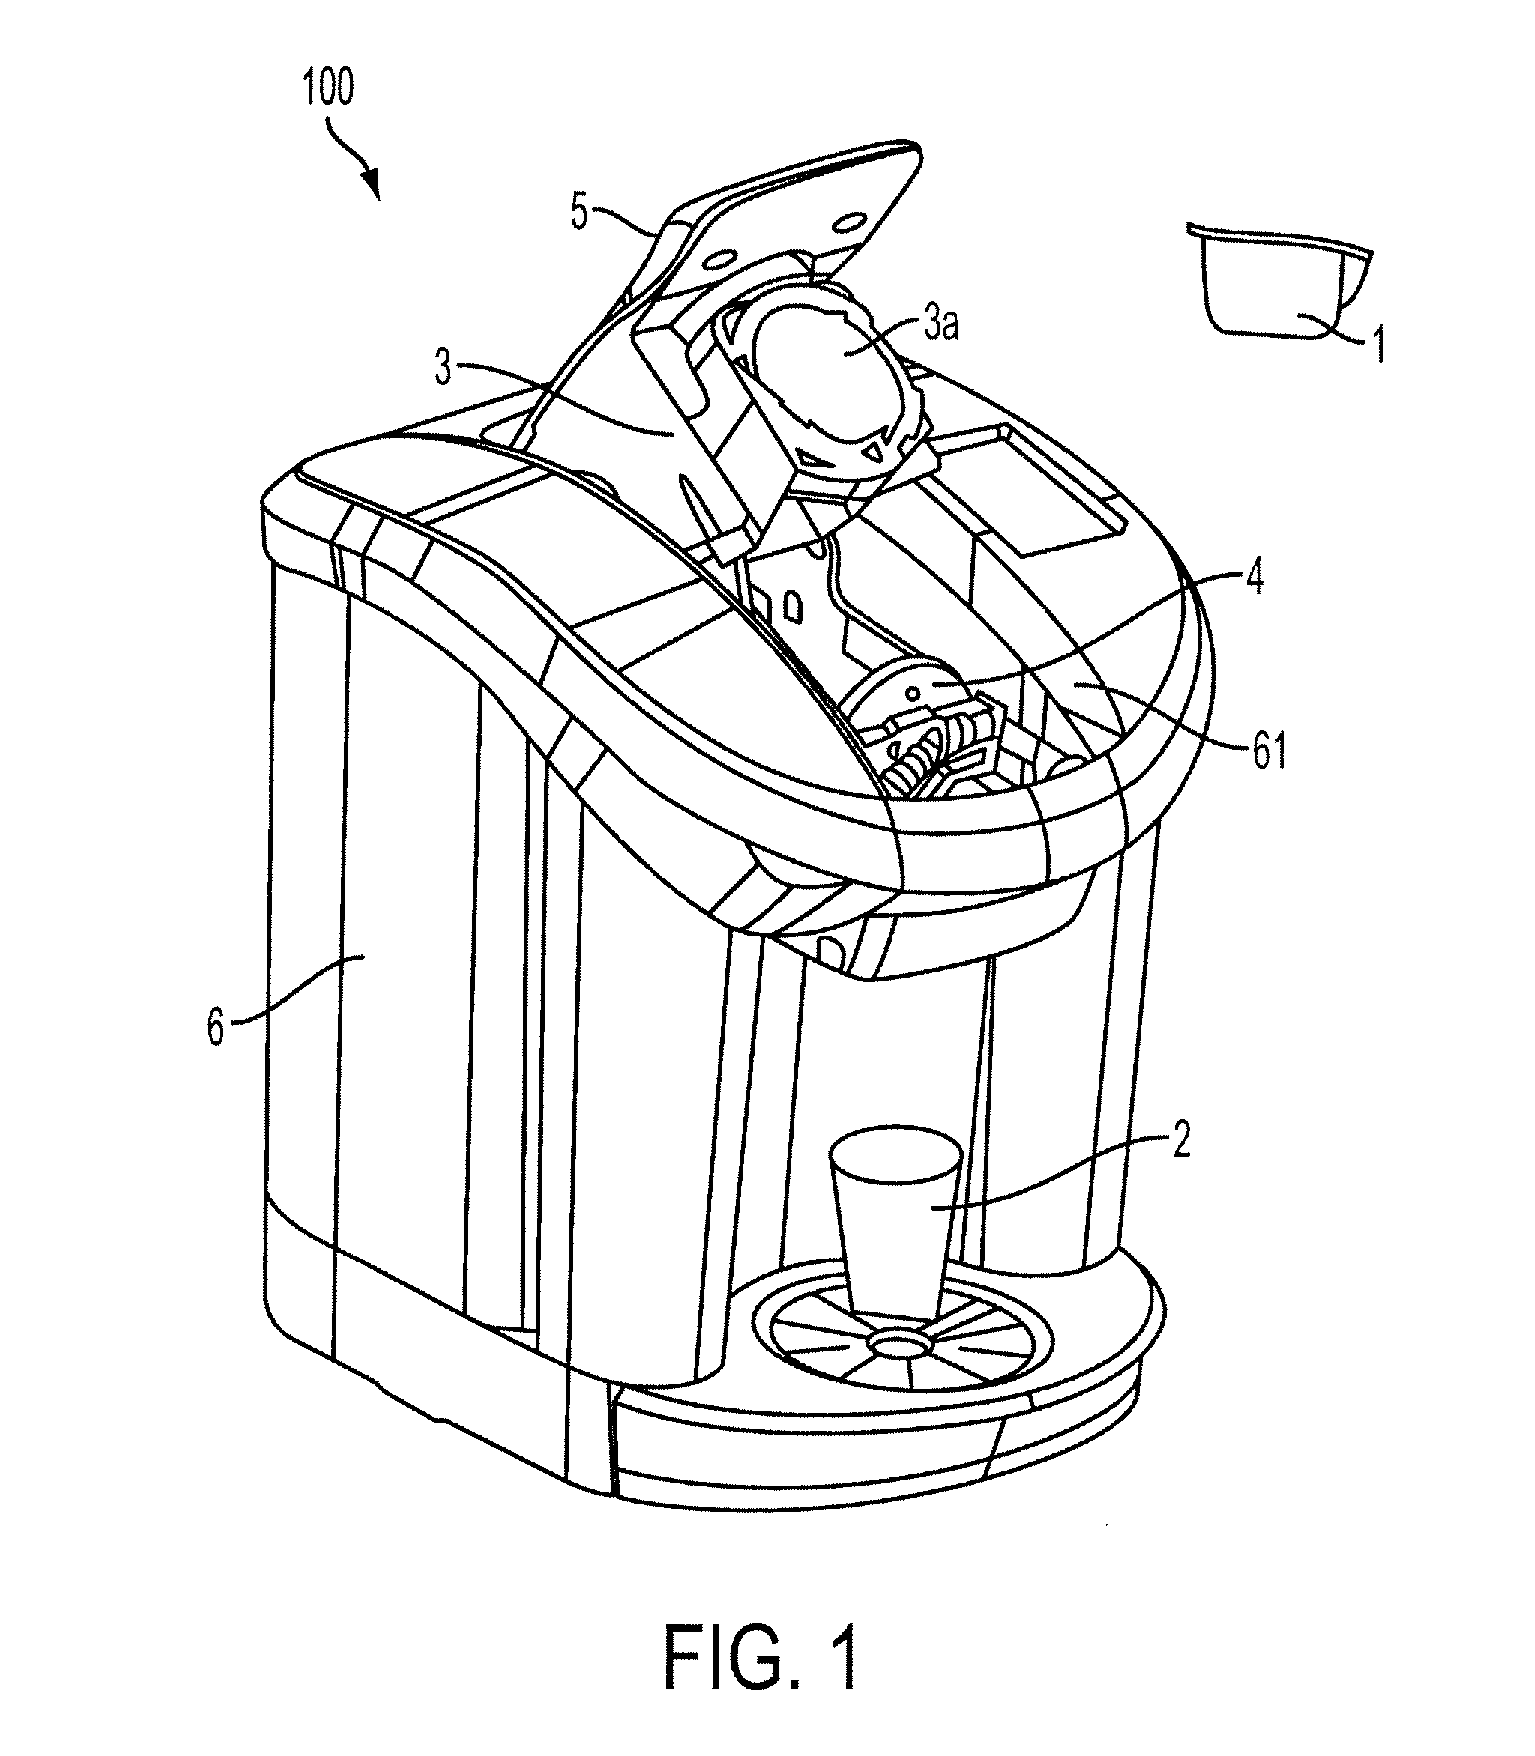 Beverage forming system having liquid delivery tank with expansion chamber